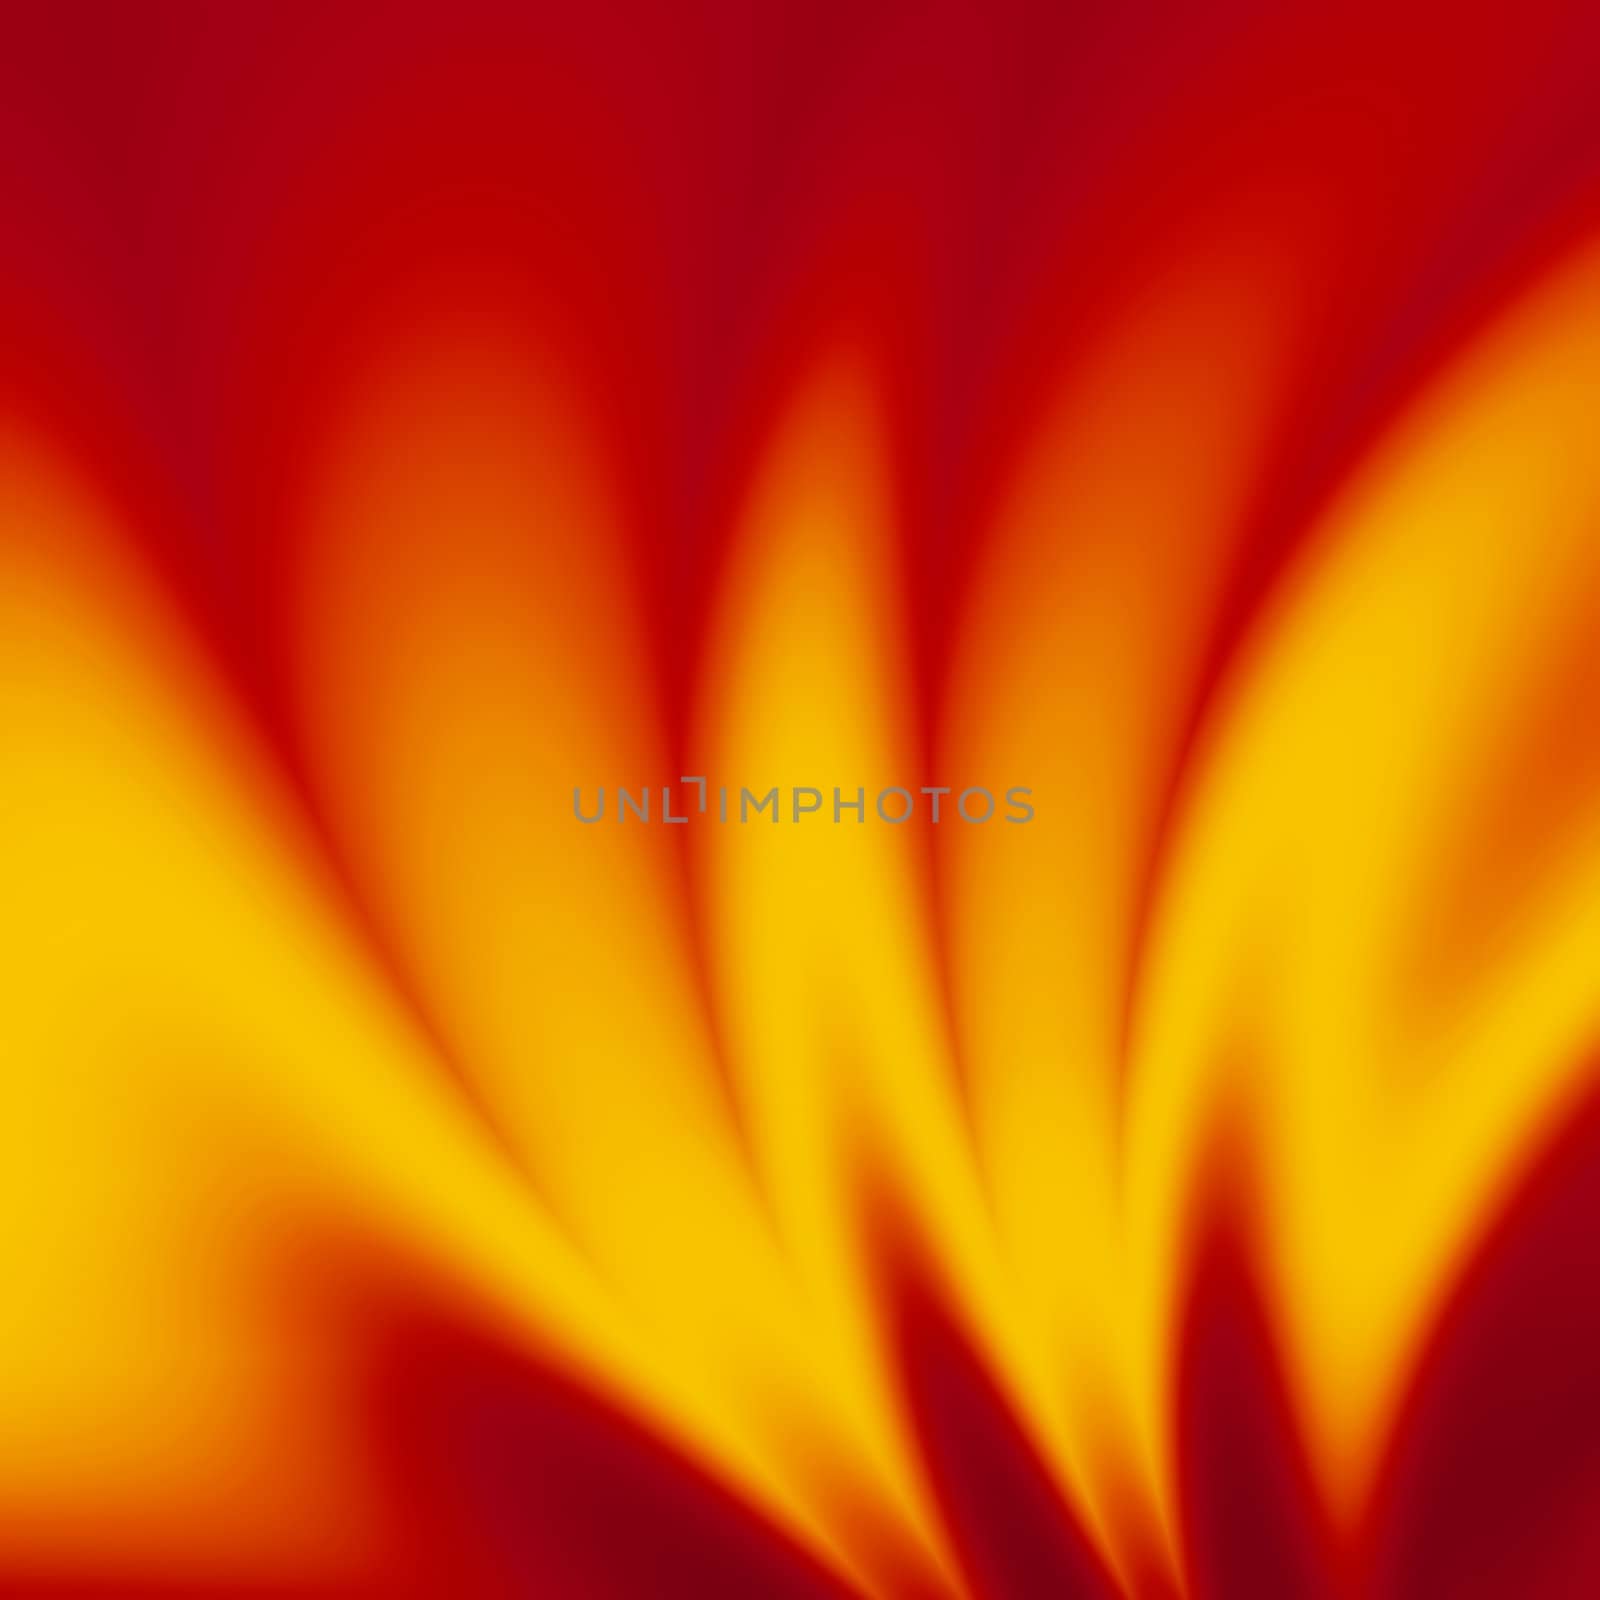 Abstract flame of red scarlet and yellow colors